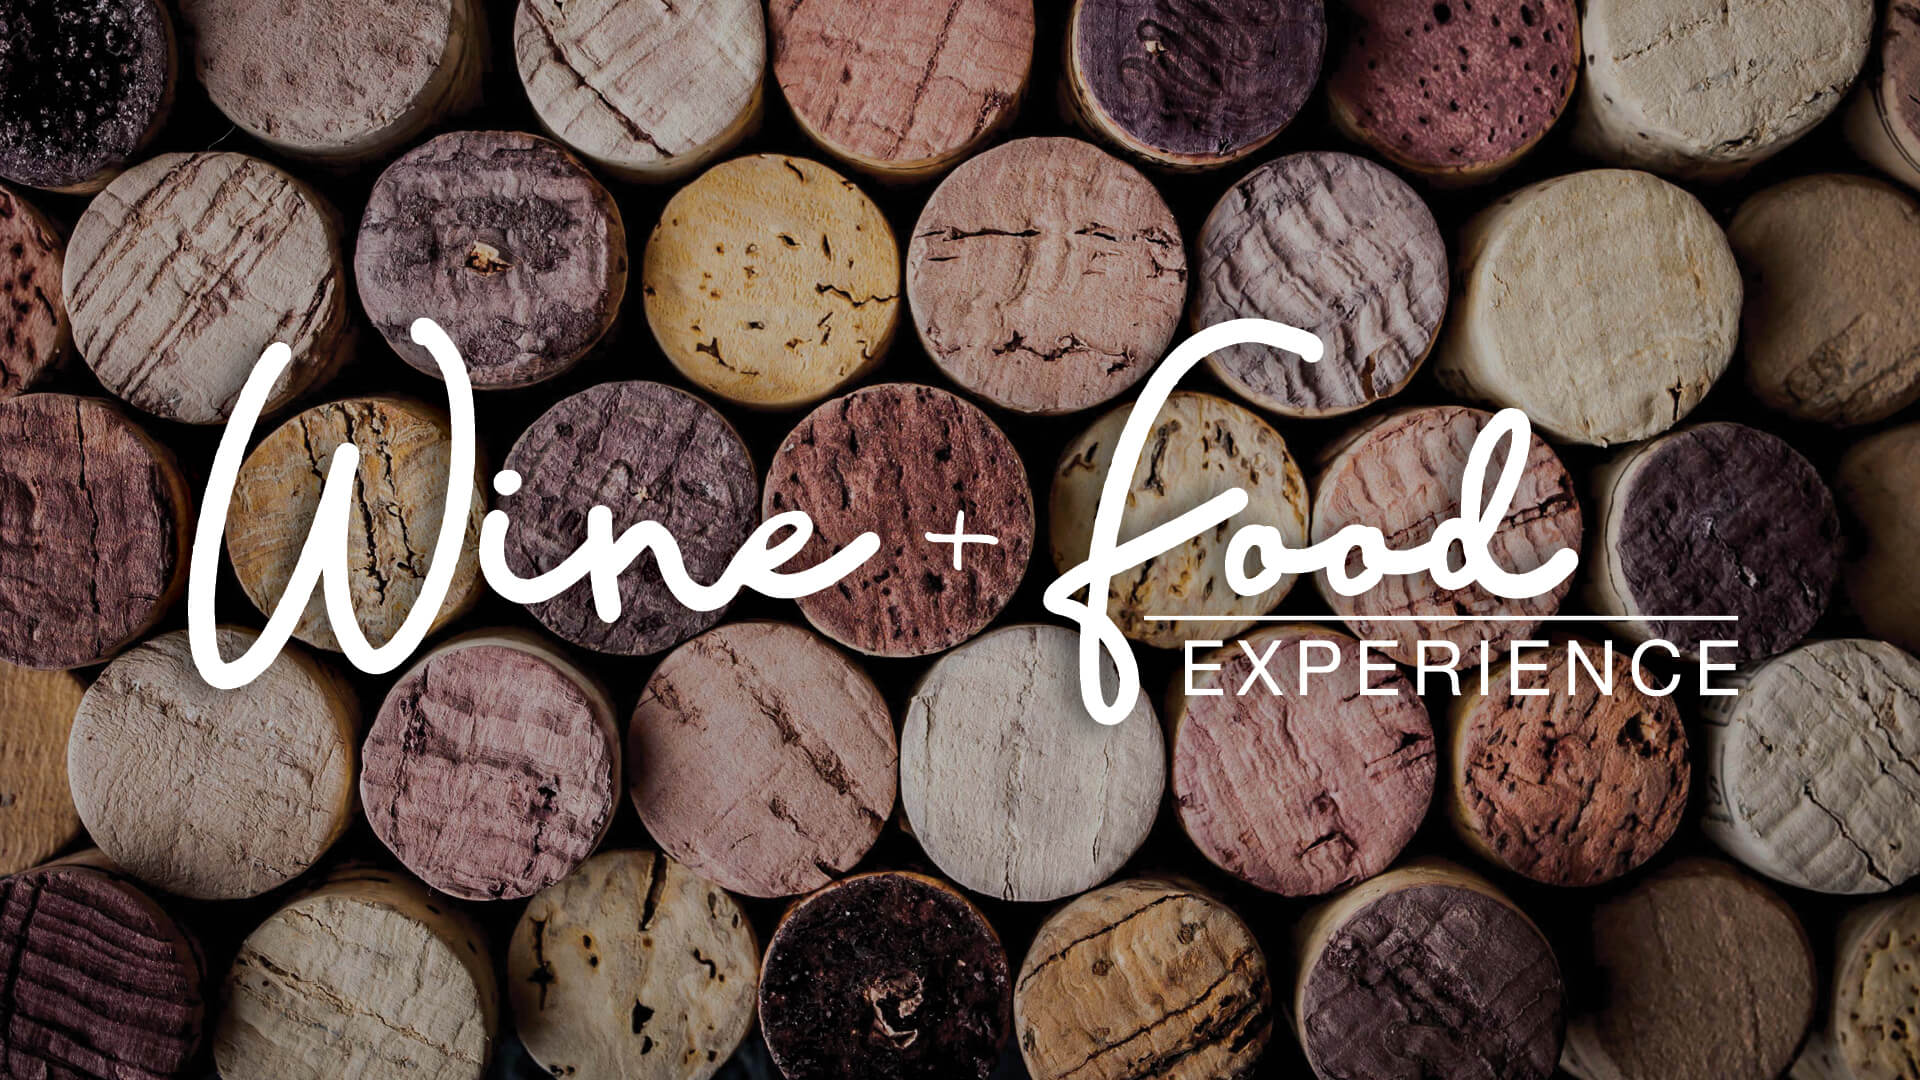 Asheville Wine & Food Experience